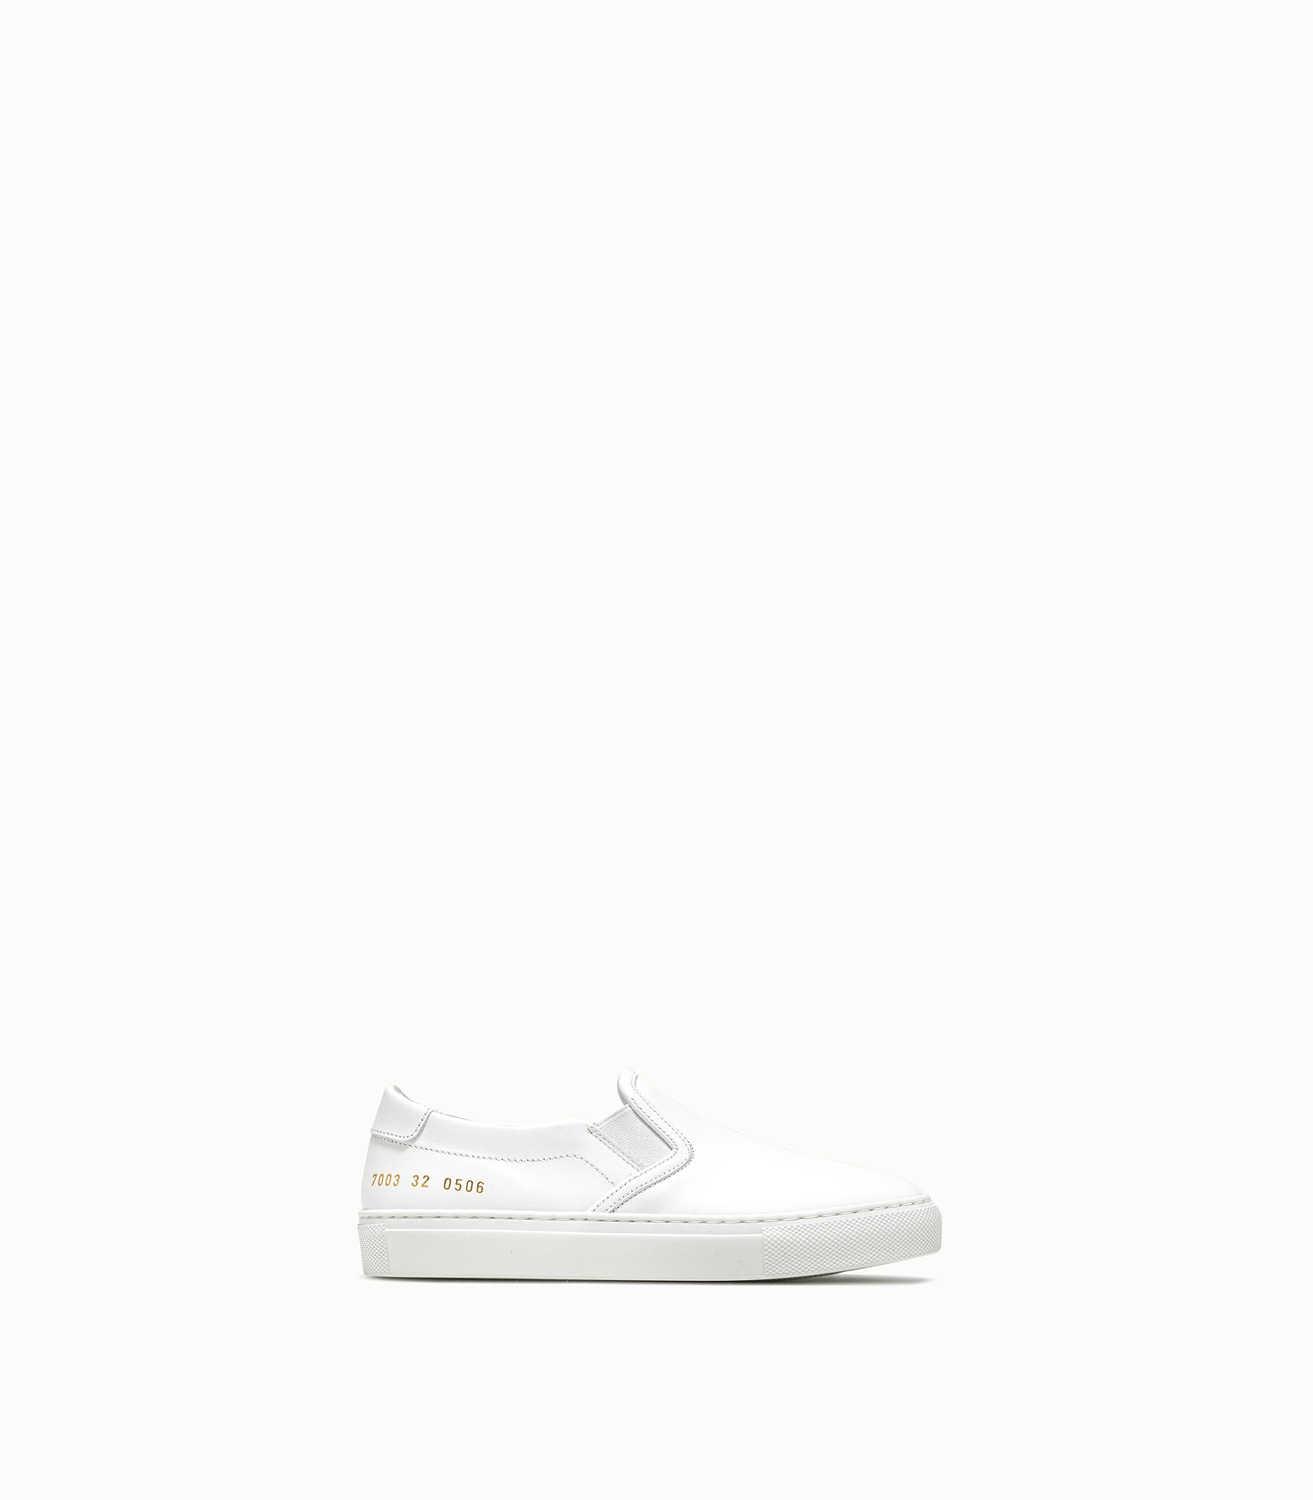 common projects white slip on